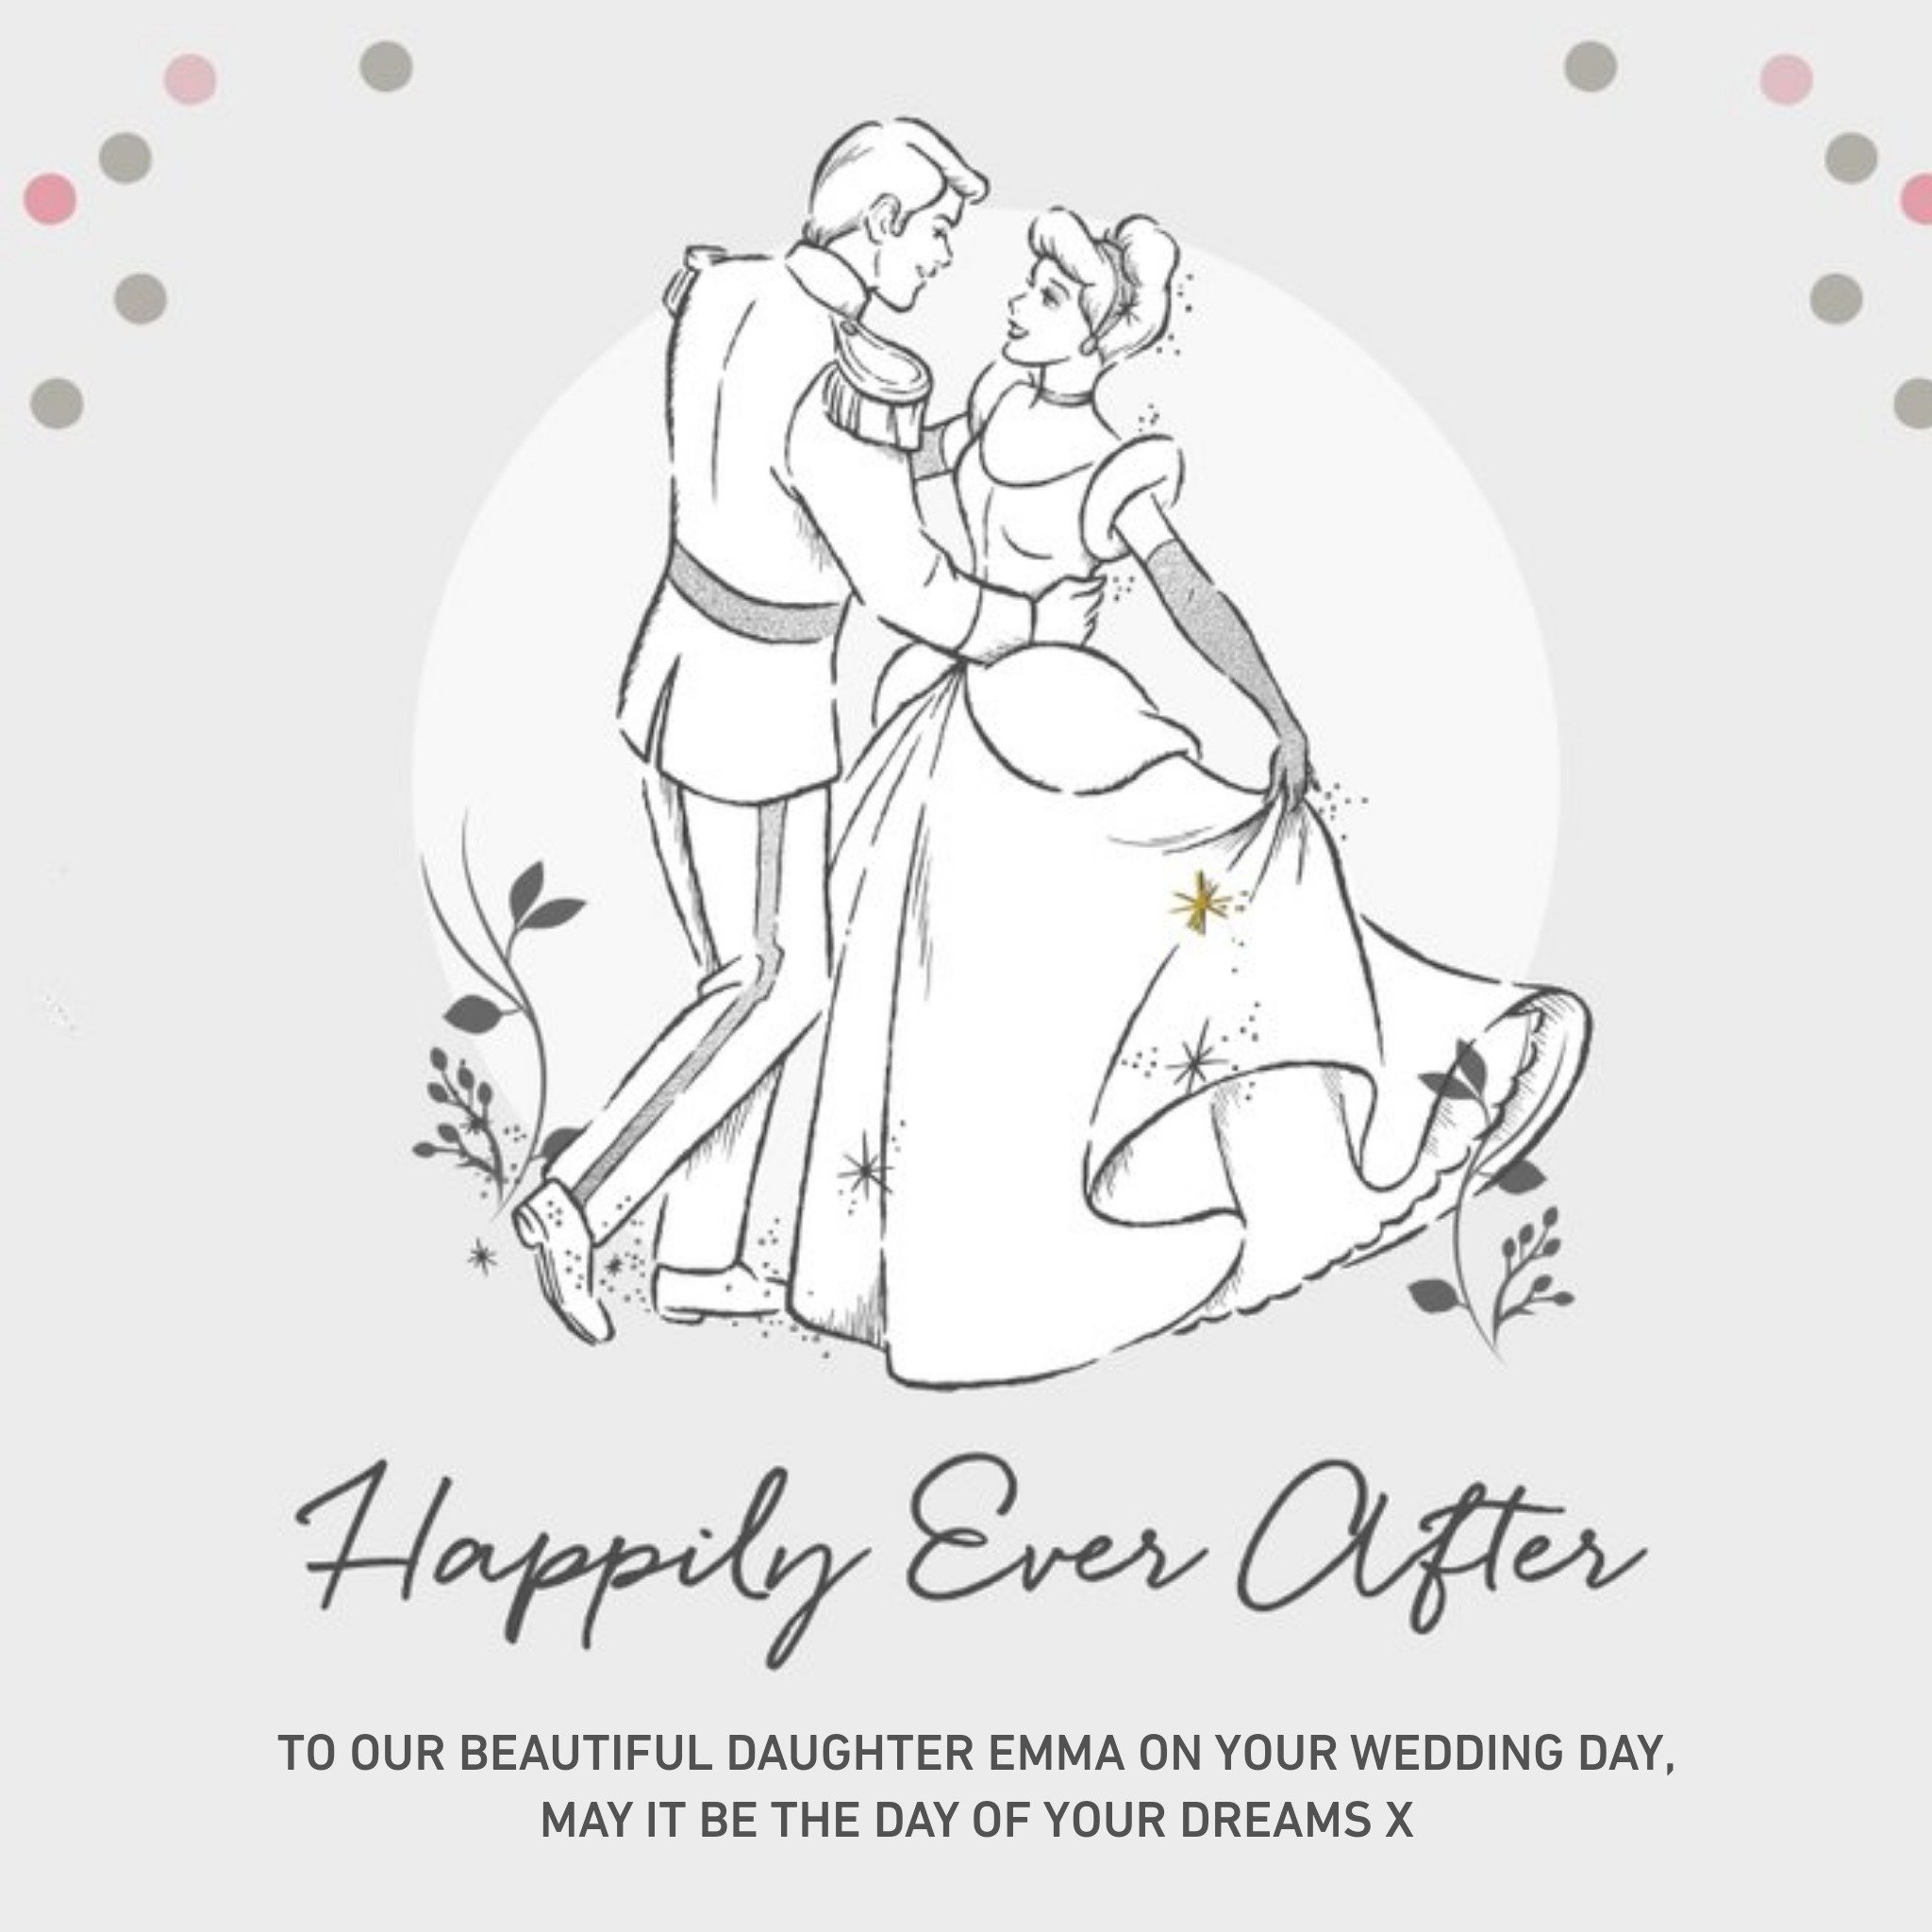 Disney Princesses Disney Cinderella And Prince Charming Happily Ever After Wedding Card For Daughter